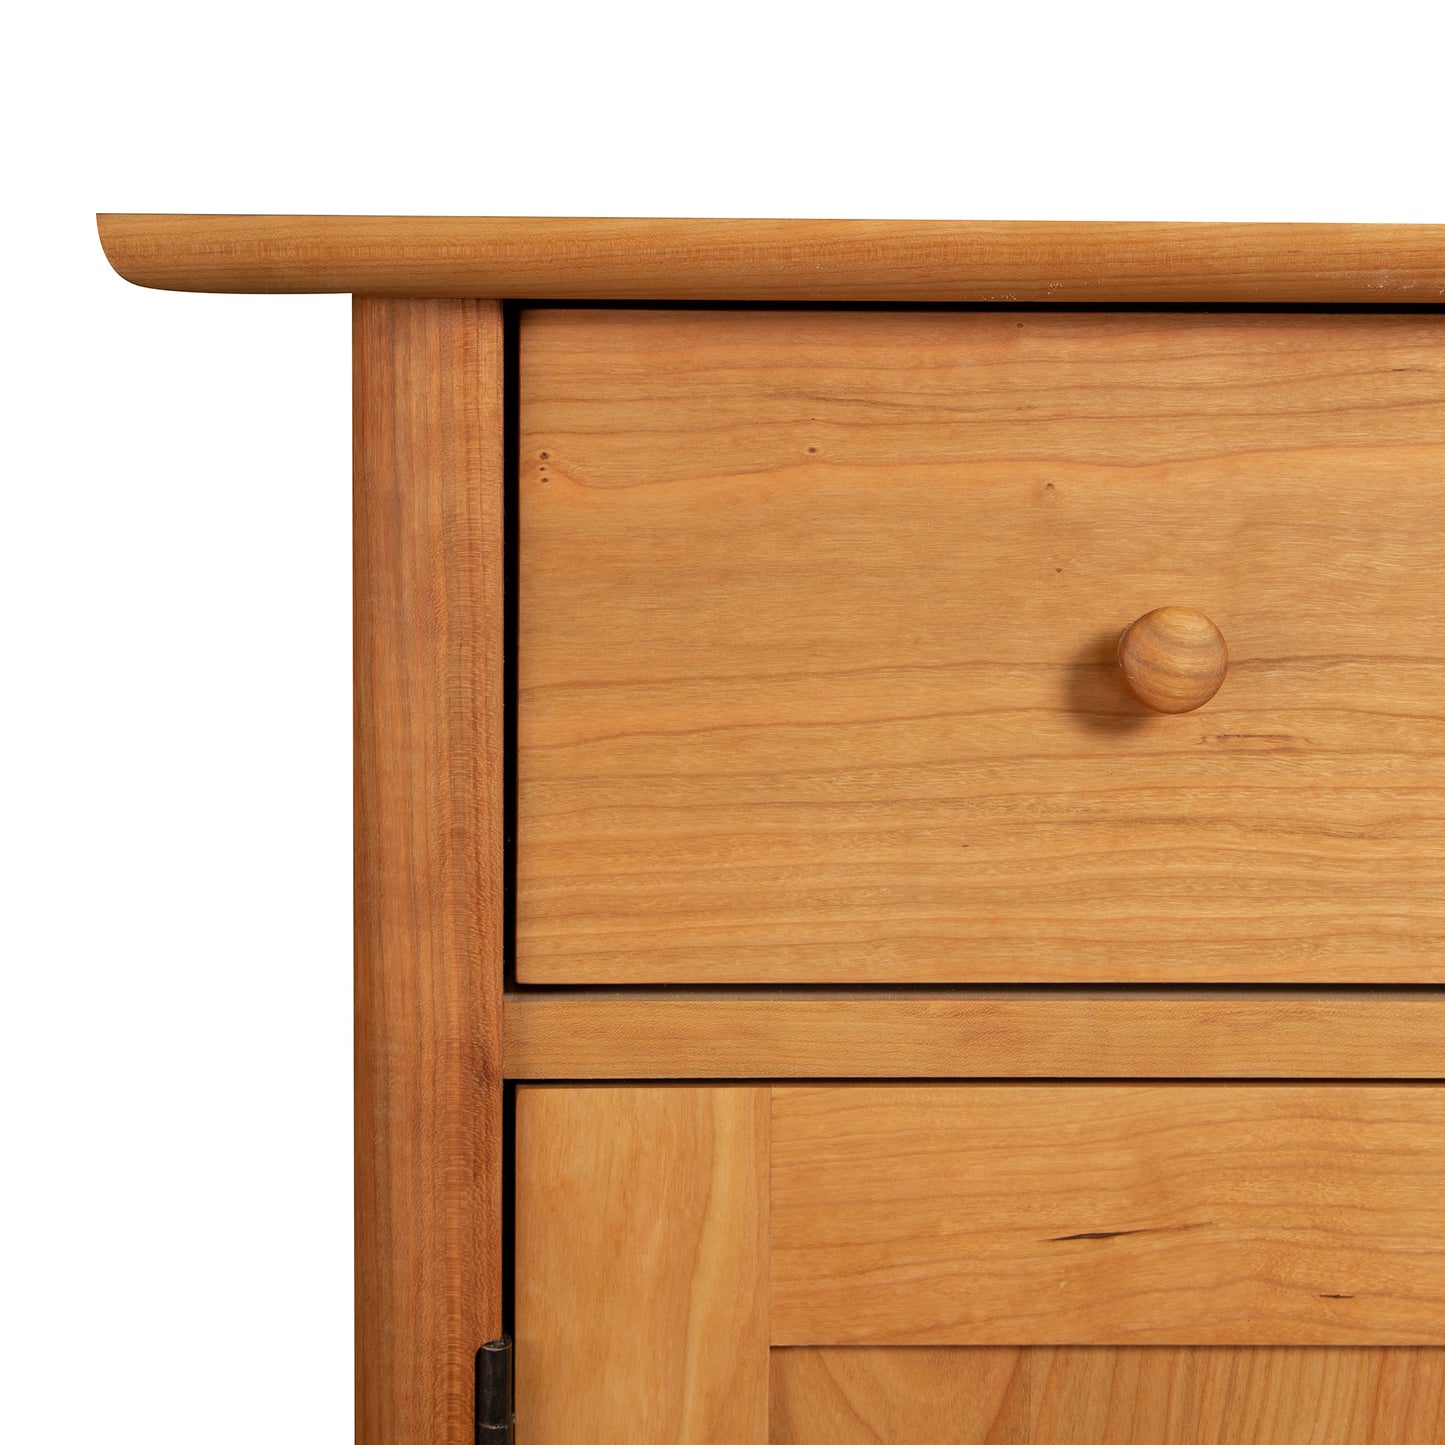 Vermont Furniture Designs Heartwood Shaker sideboard with a drawer partly open, isolated on a white background.